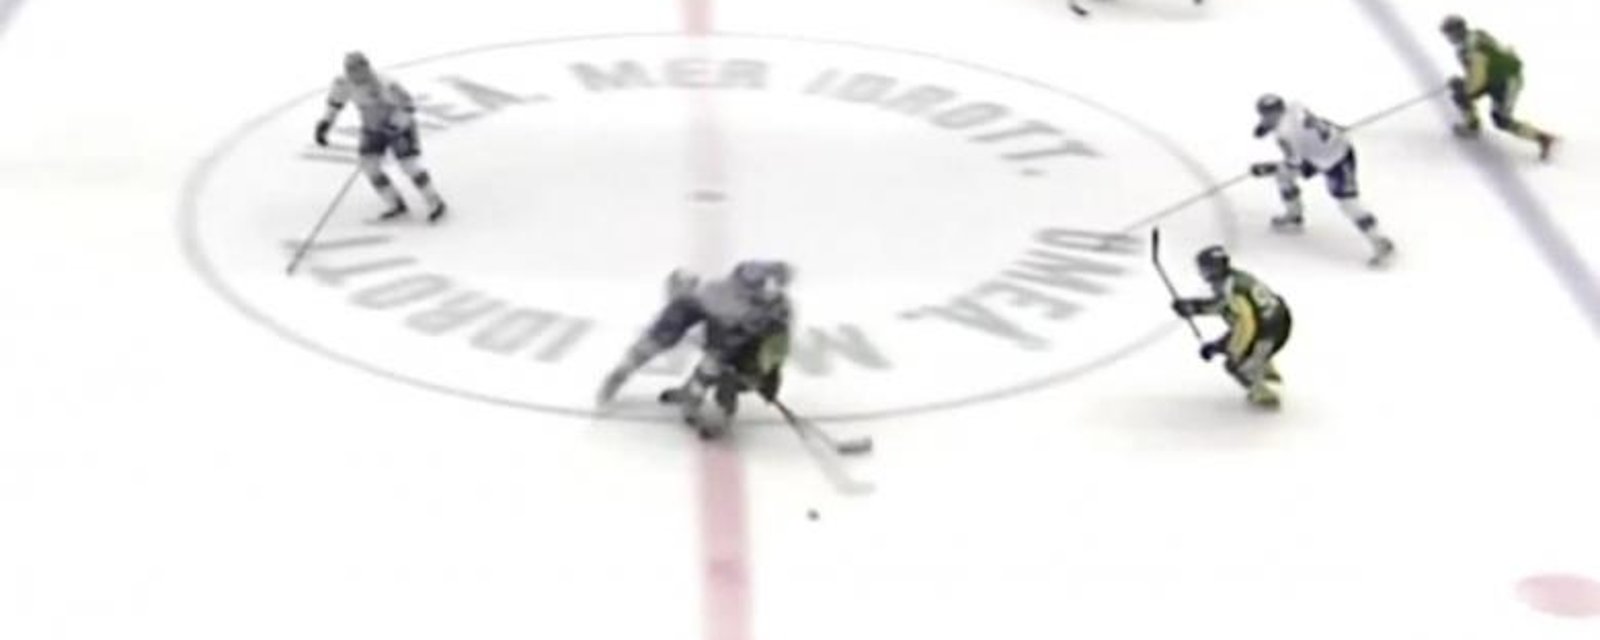 Video: Player gets literally destroyed on monster hit.